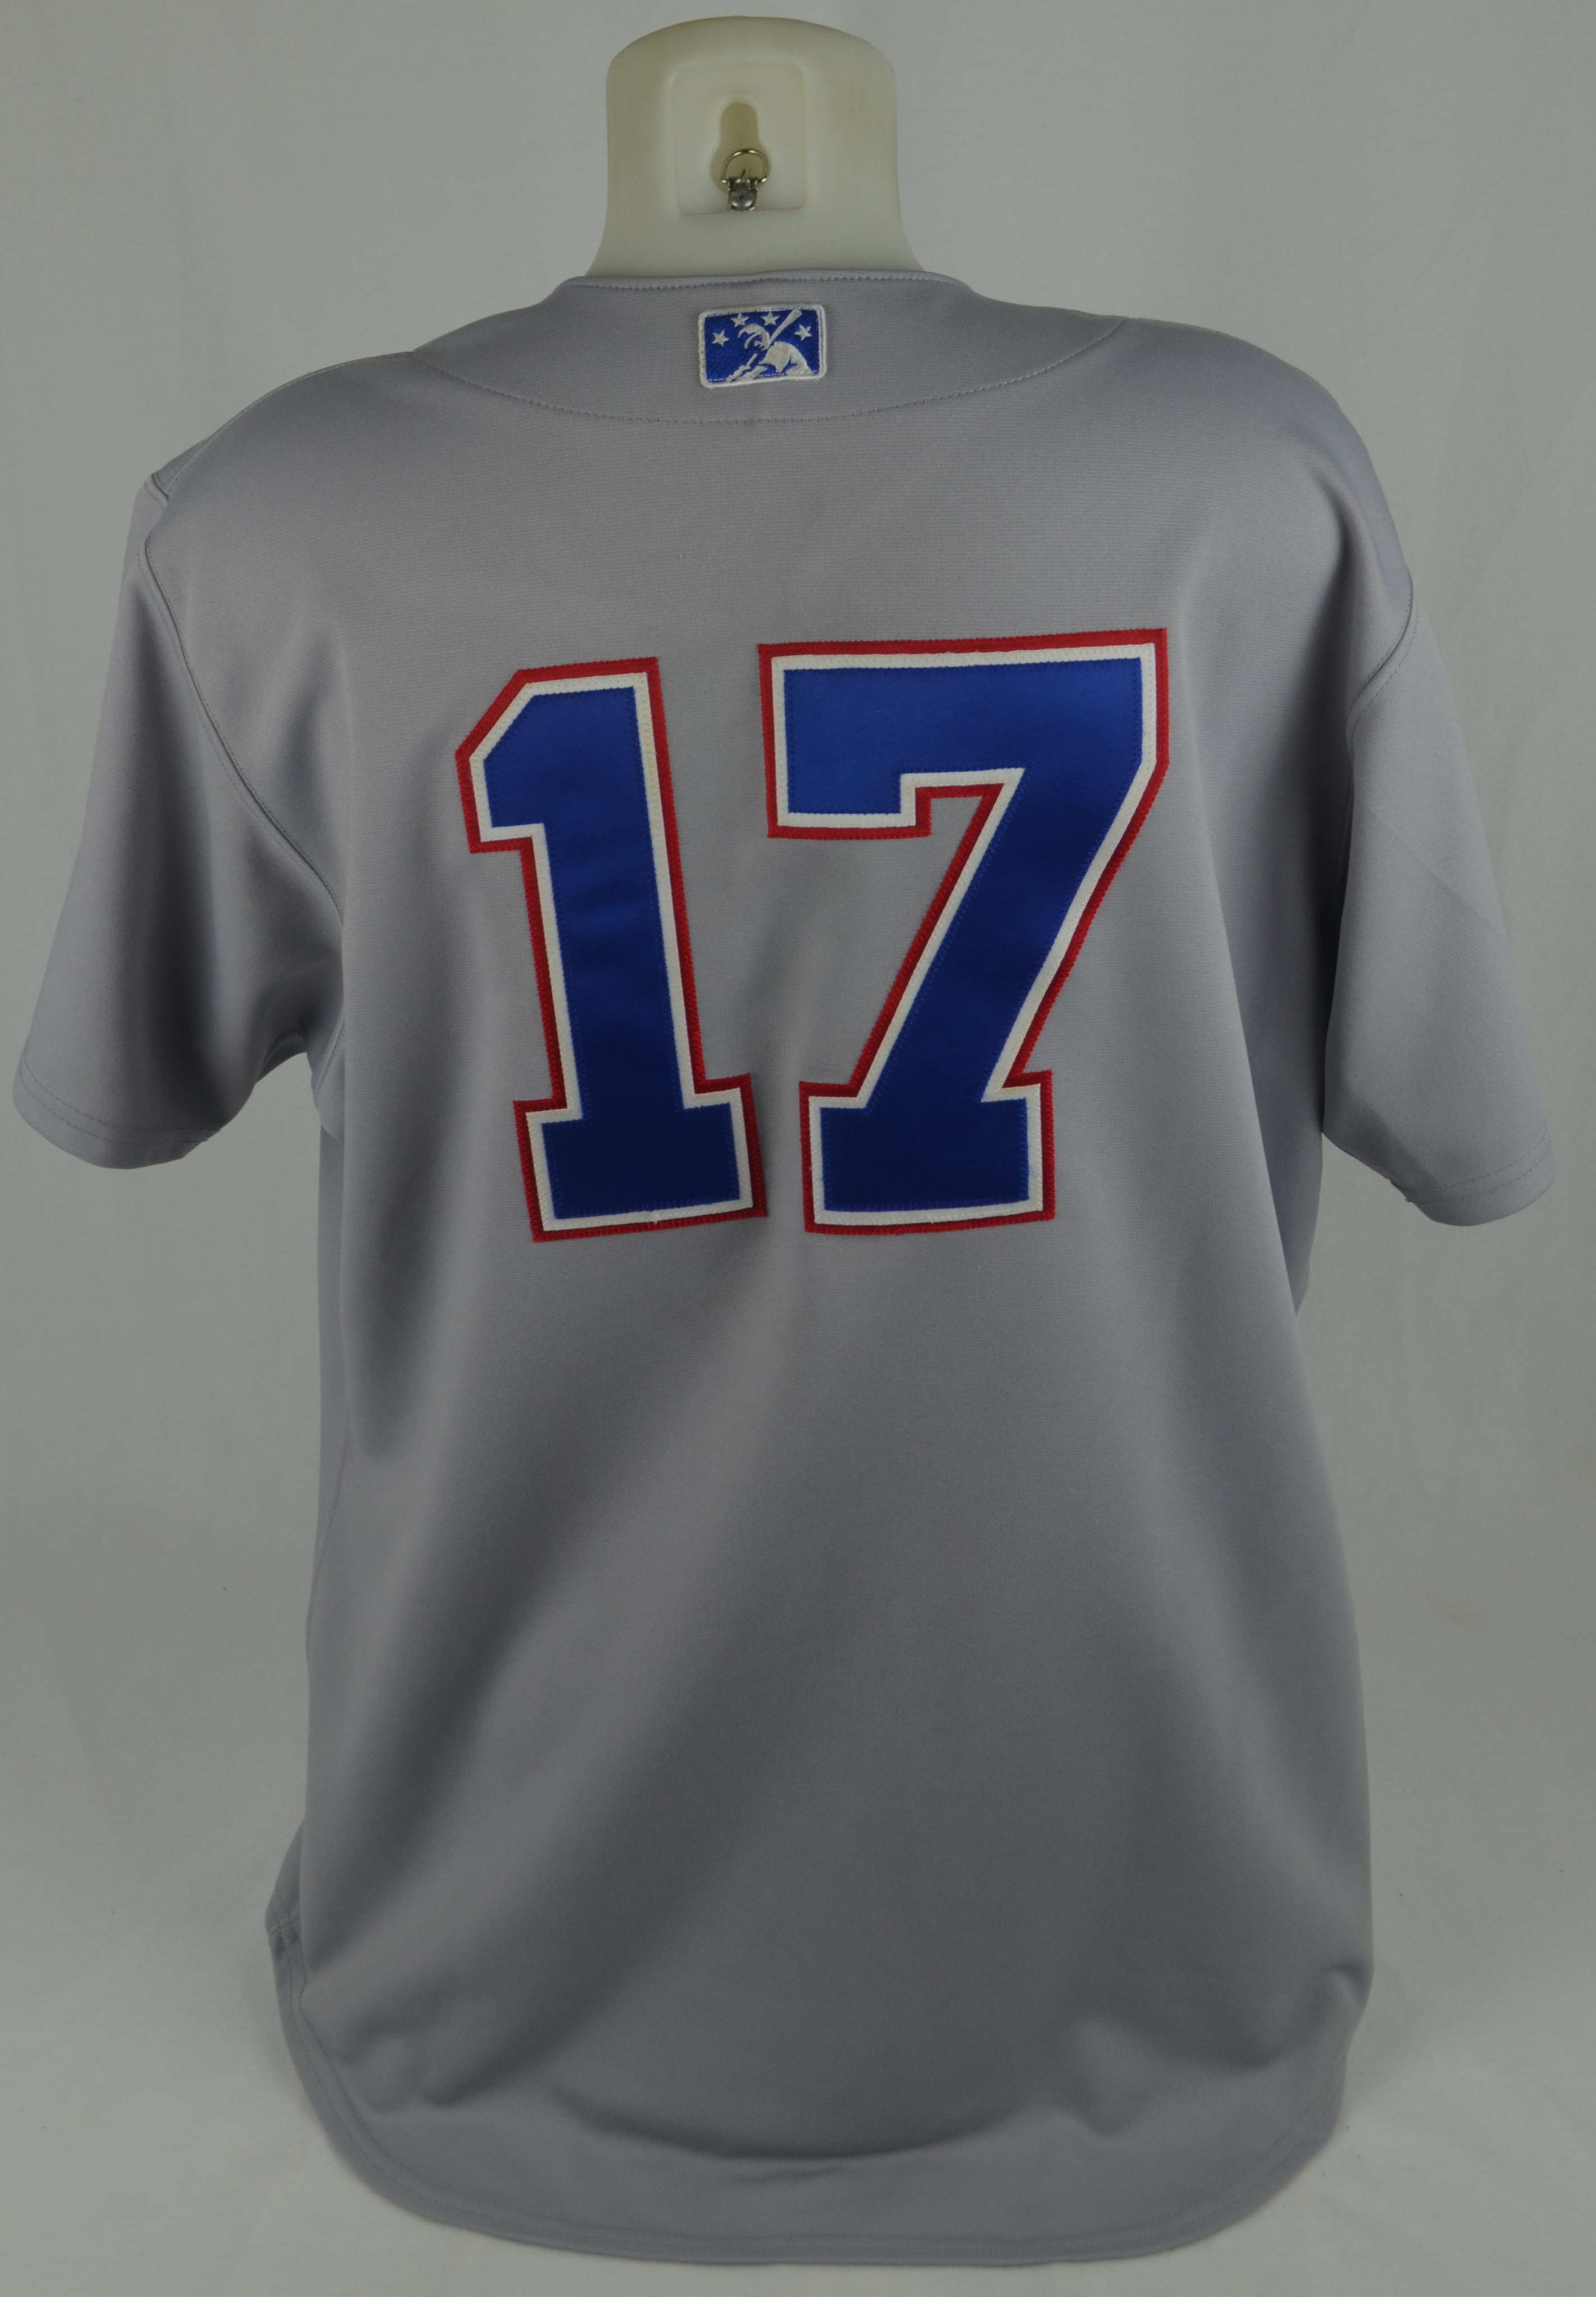 Lot Detail - Kris Bryant 2014 Tennessee Smokies Game Used Jersey w/Dave  Miedema LOA